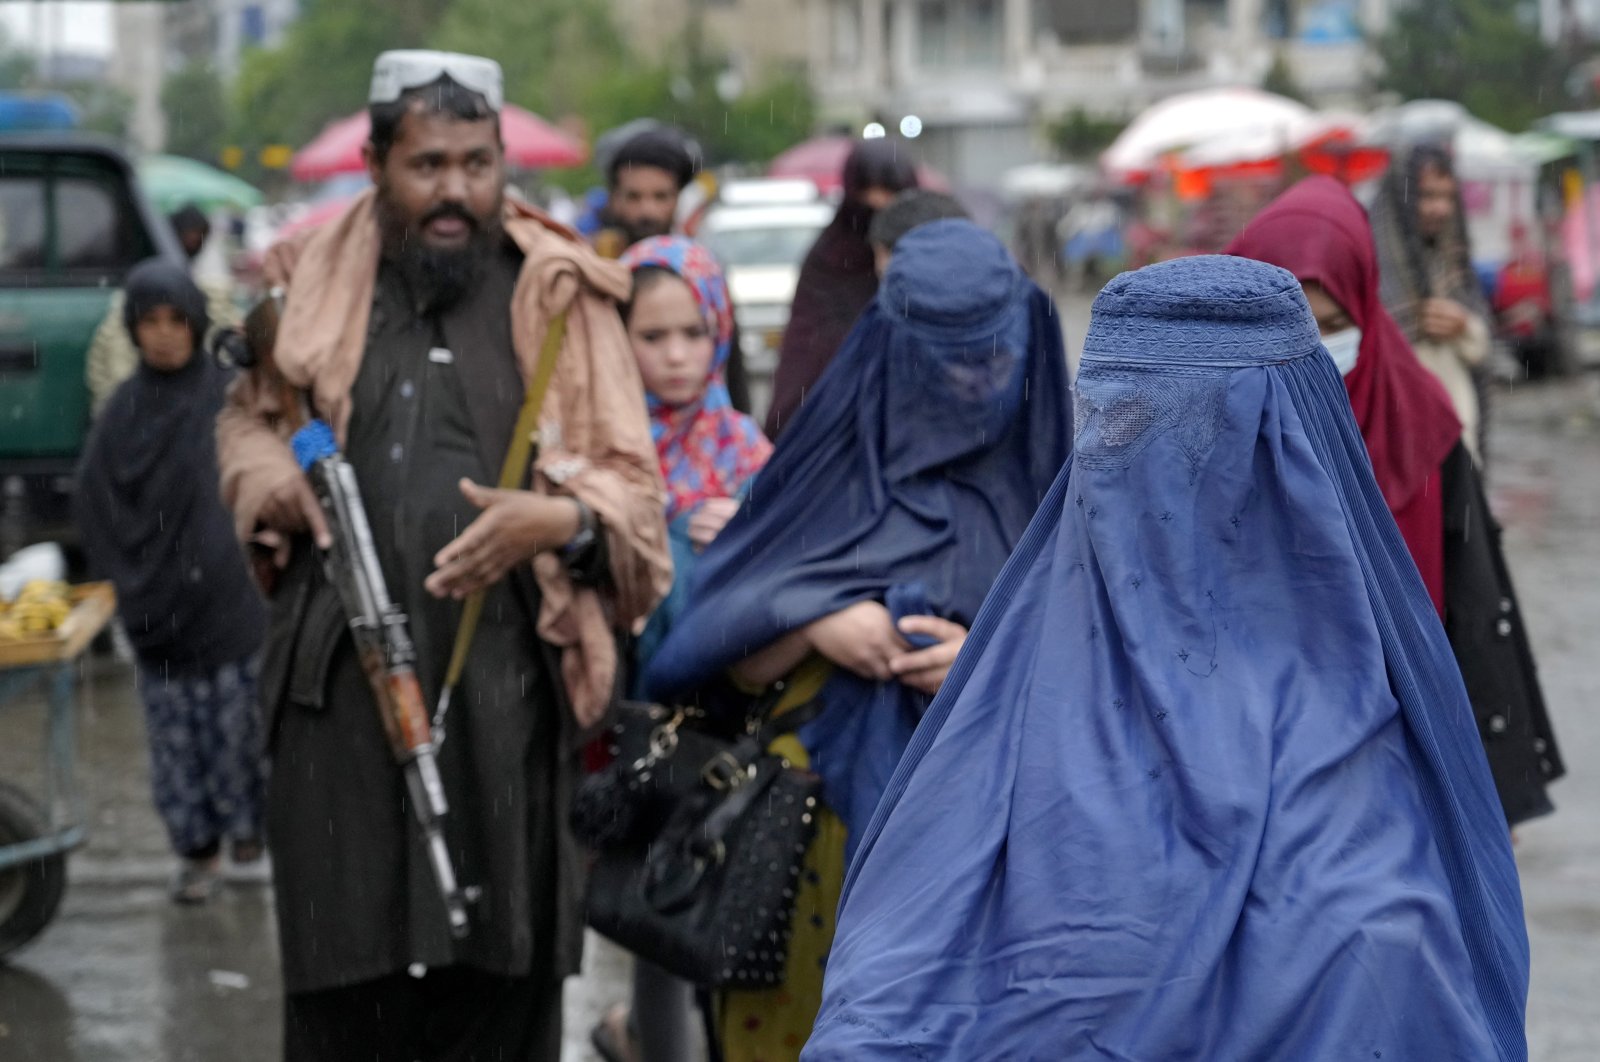 Women walk through the old market as a Taliban fighter stands guard, in the city of Kabul, Afghanistan, May 3, 2022. (AP Photo)